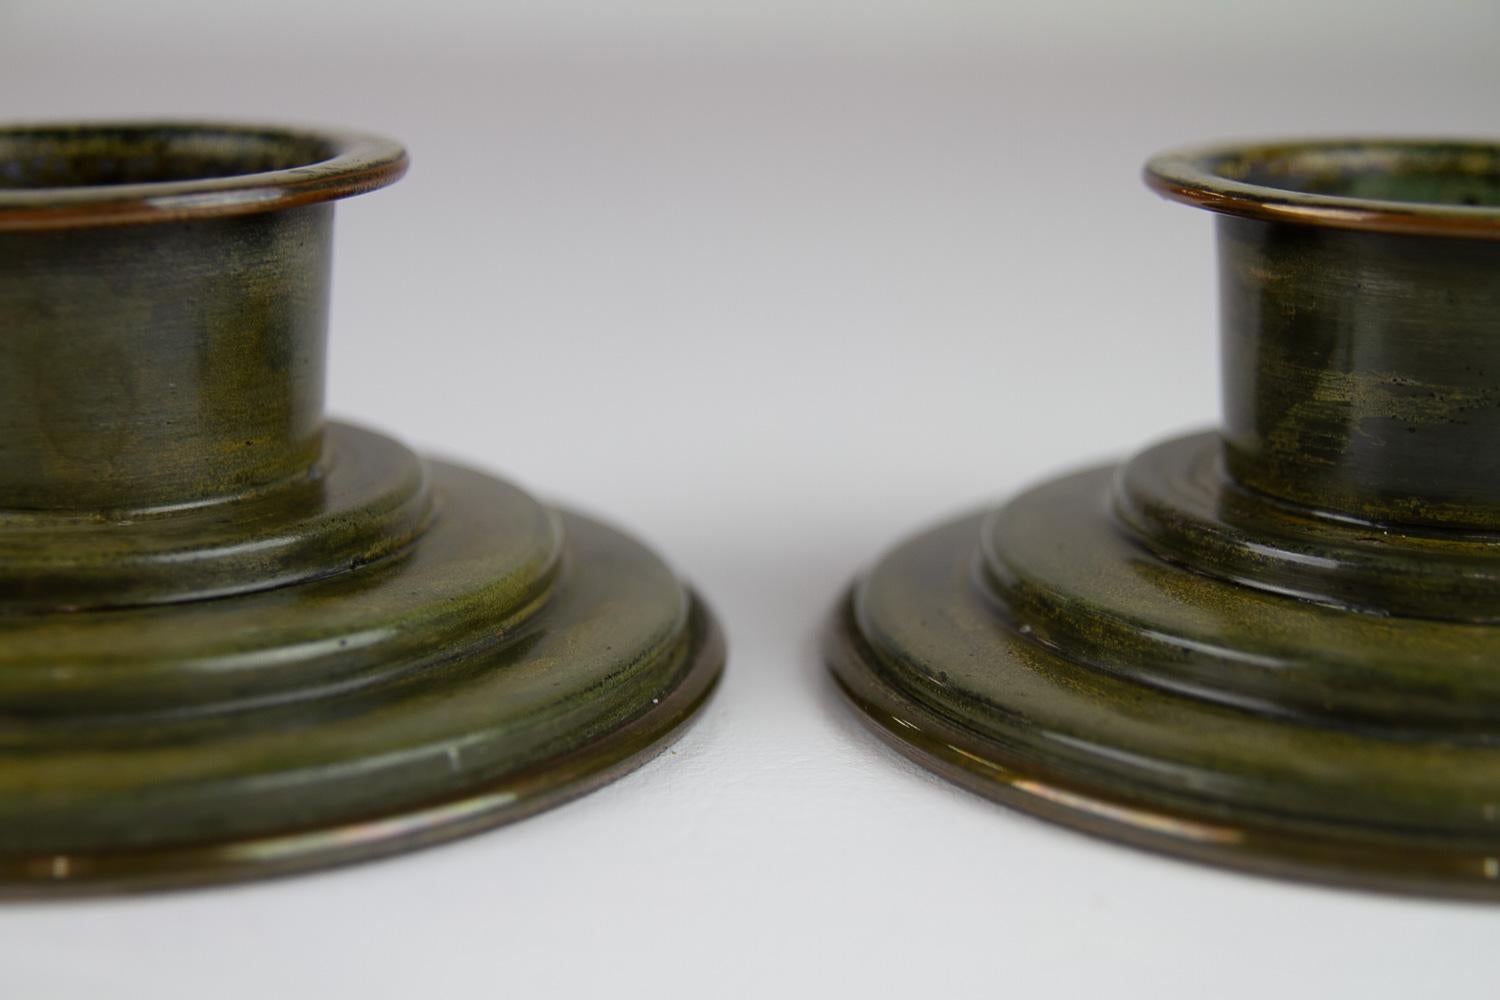 Mid-20th Century Danish Art Deco Bronze Candleholders by HF Bronce, 1930s. For Sale